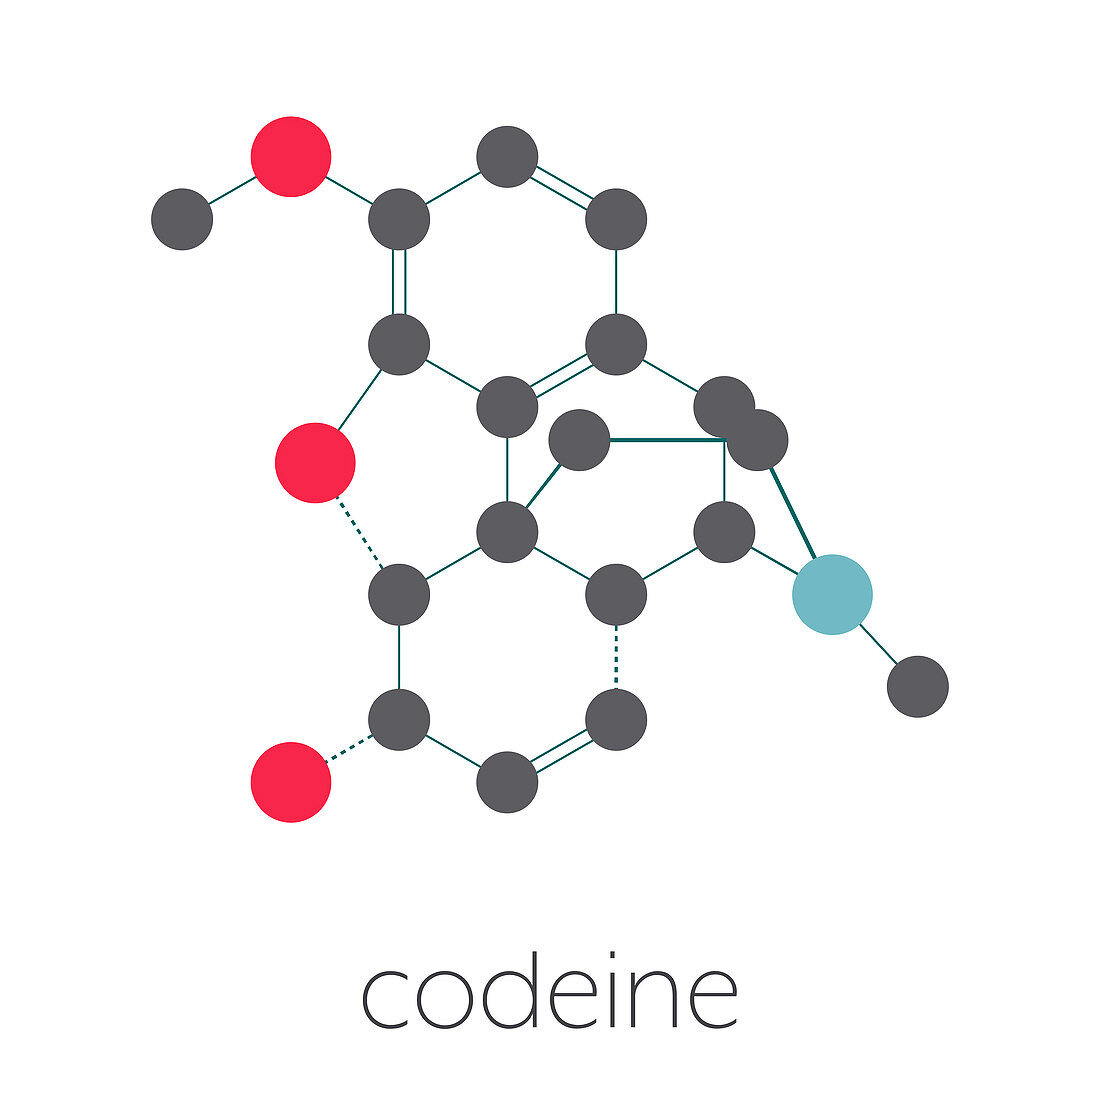 Codeine pain and cough relief drug, molecular model